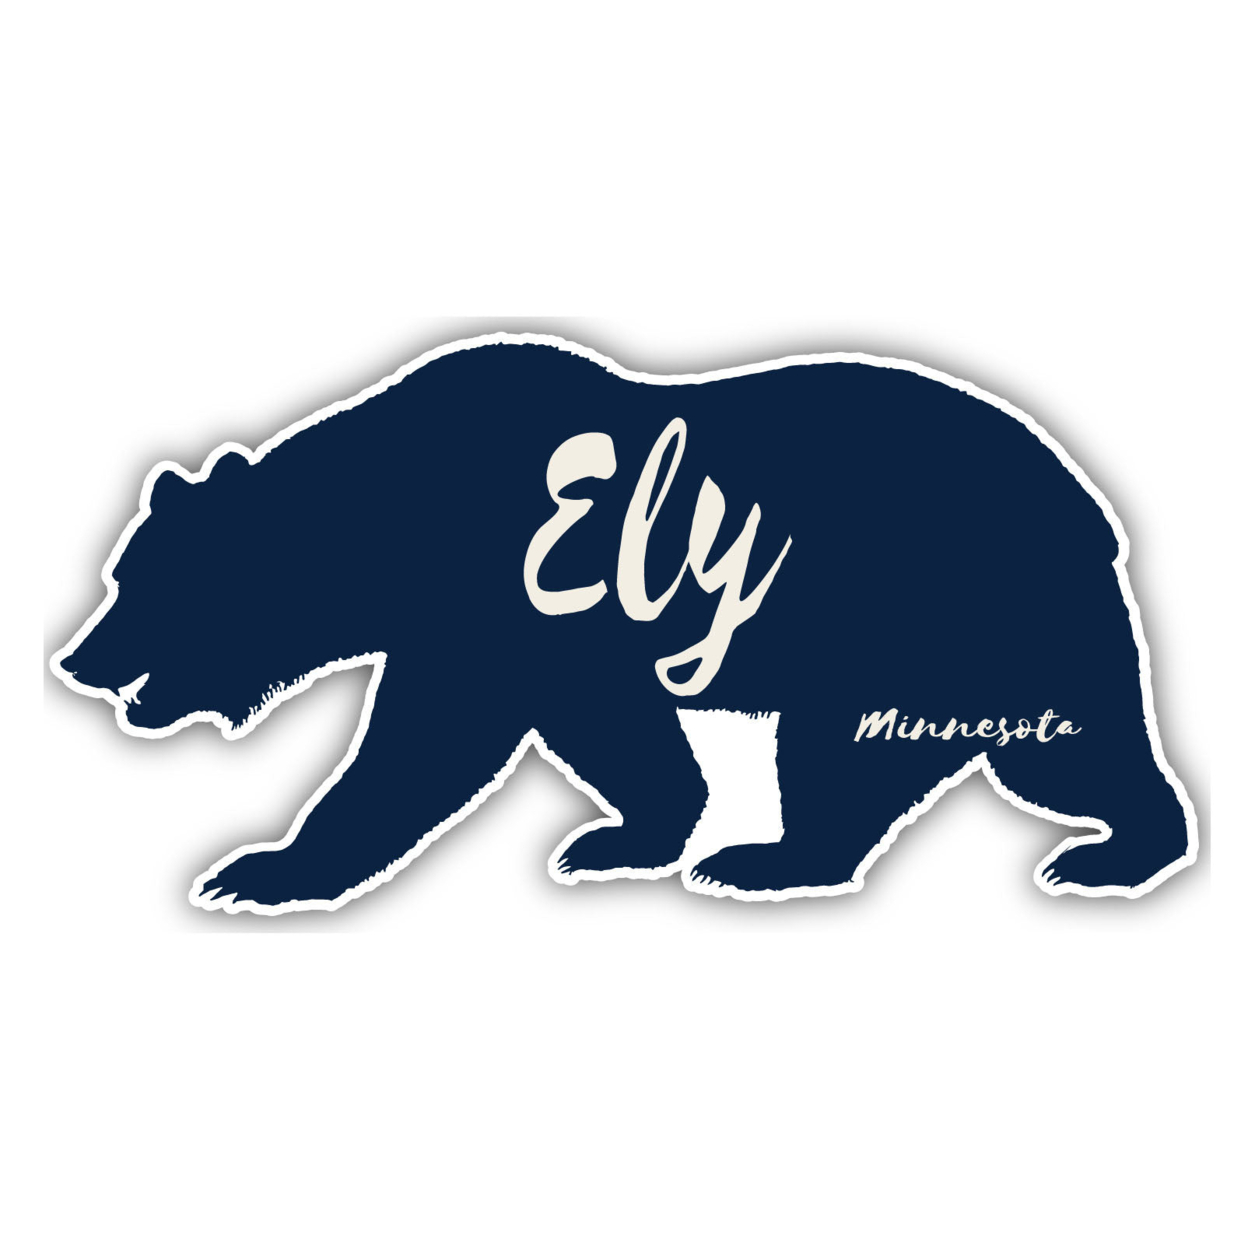 Ely Minnesota Souvenir Decorative Stickers (Choose Theme And Size) - 4-Pack, 8-Inch, Camp Life